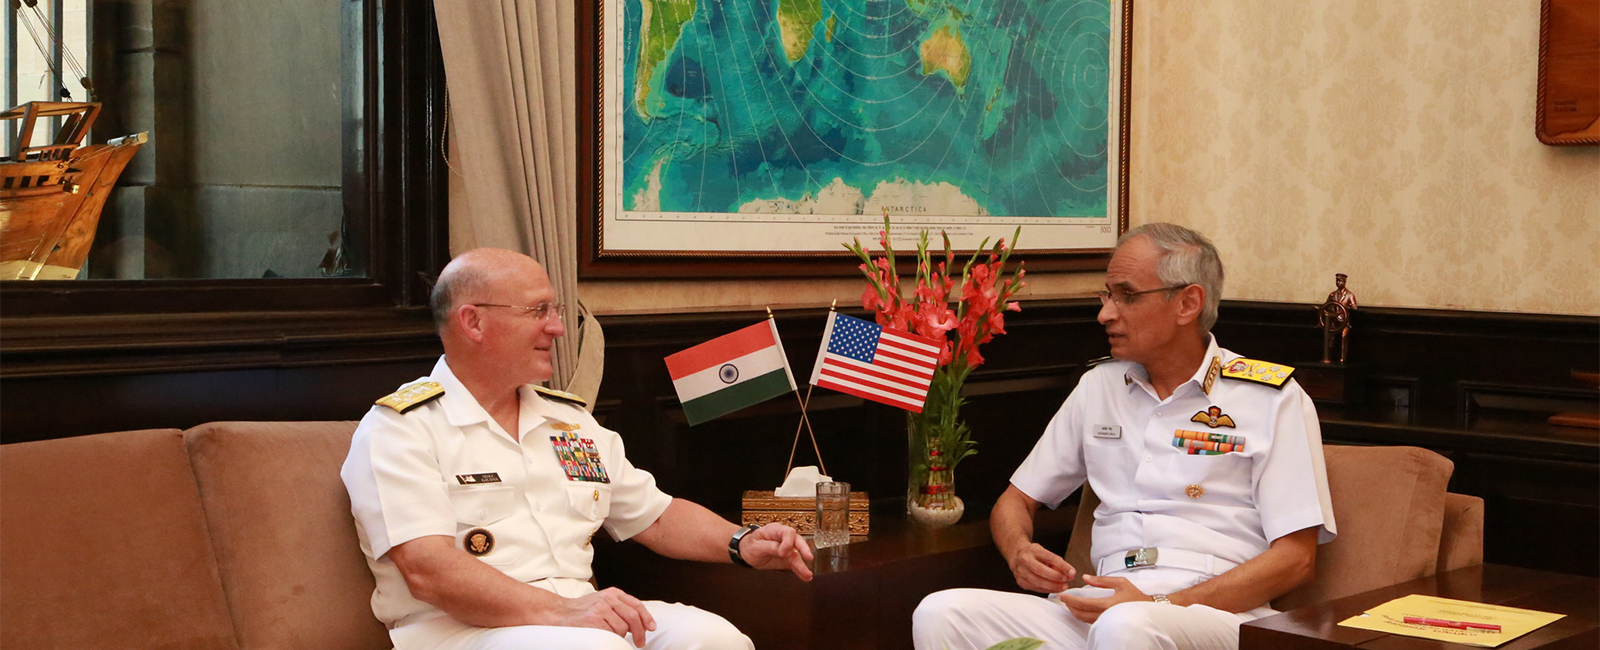 Chief of Naval Operations (CNO) Adm. Mike Gilday, left, meets with Indian navy Chief of Naval Staff Adm. Karambir Singh.